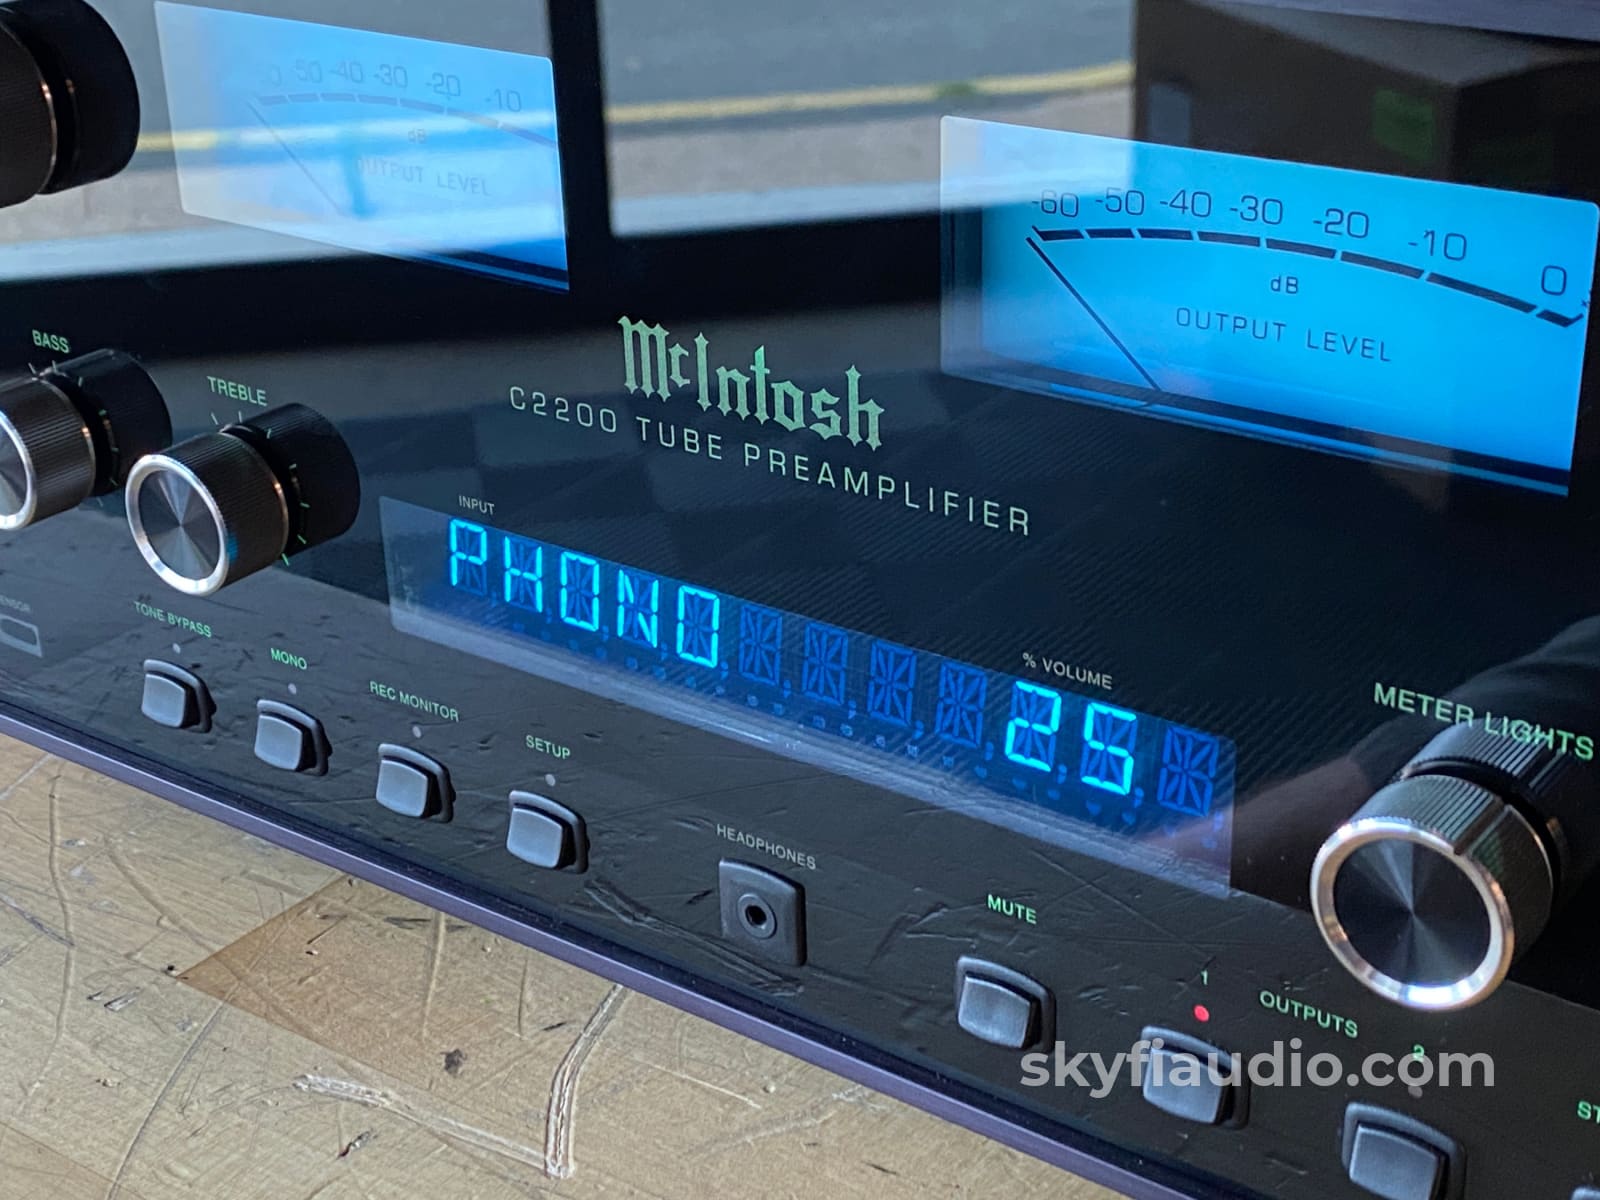 Mcintosh C2200 All Tube Analog Preamplifier - Serviced!